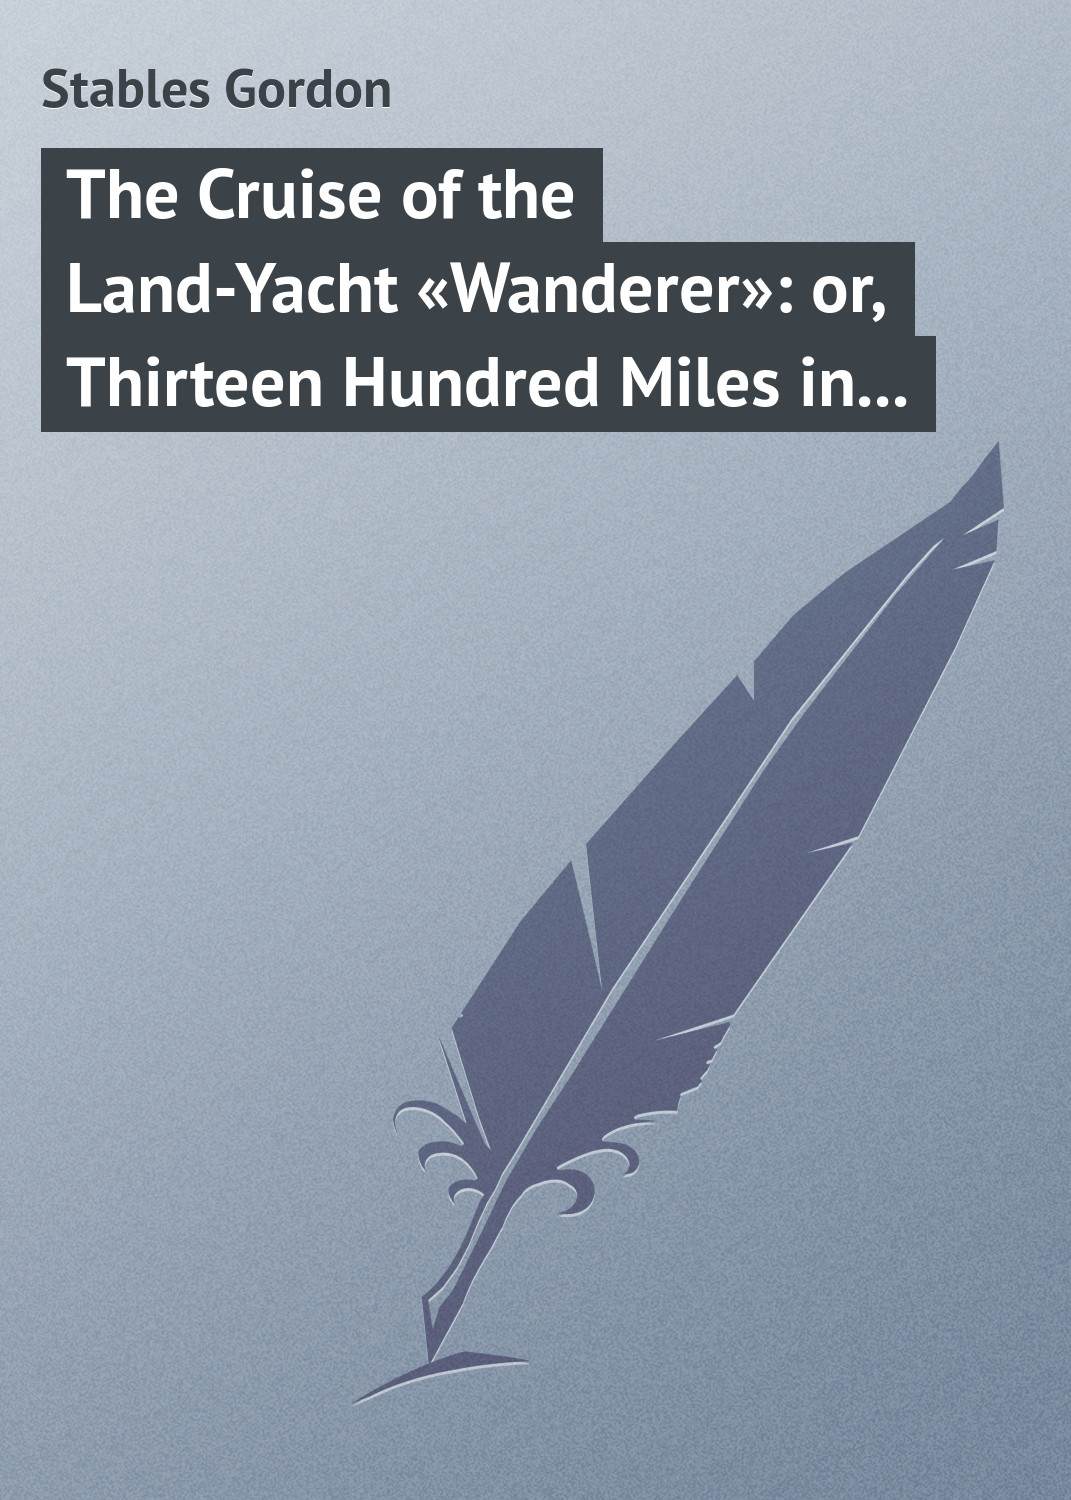 The Cruise of the Land-Yacht«Wanderer»: or, Thirteen Hundred Miles in my Caravan